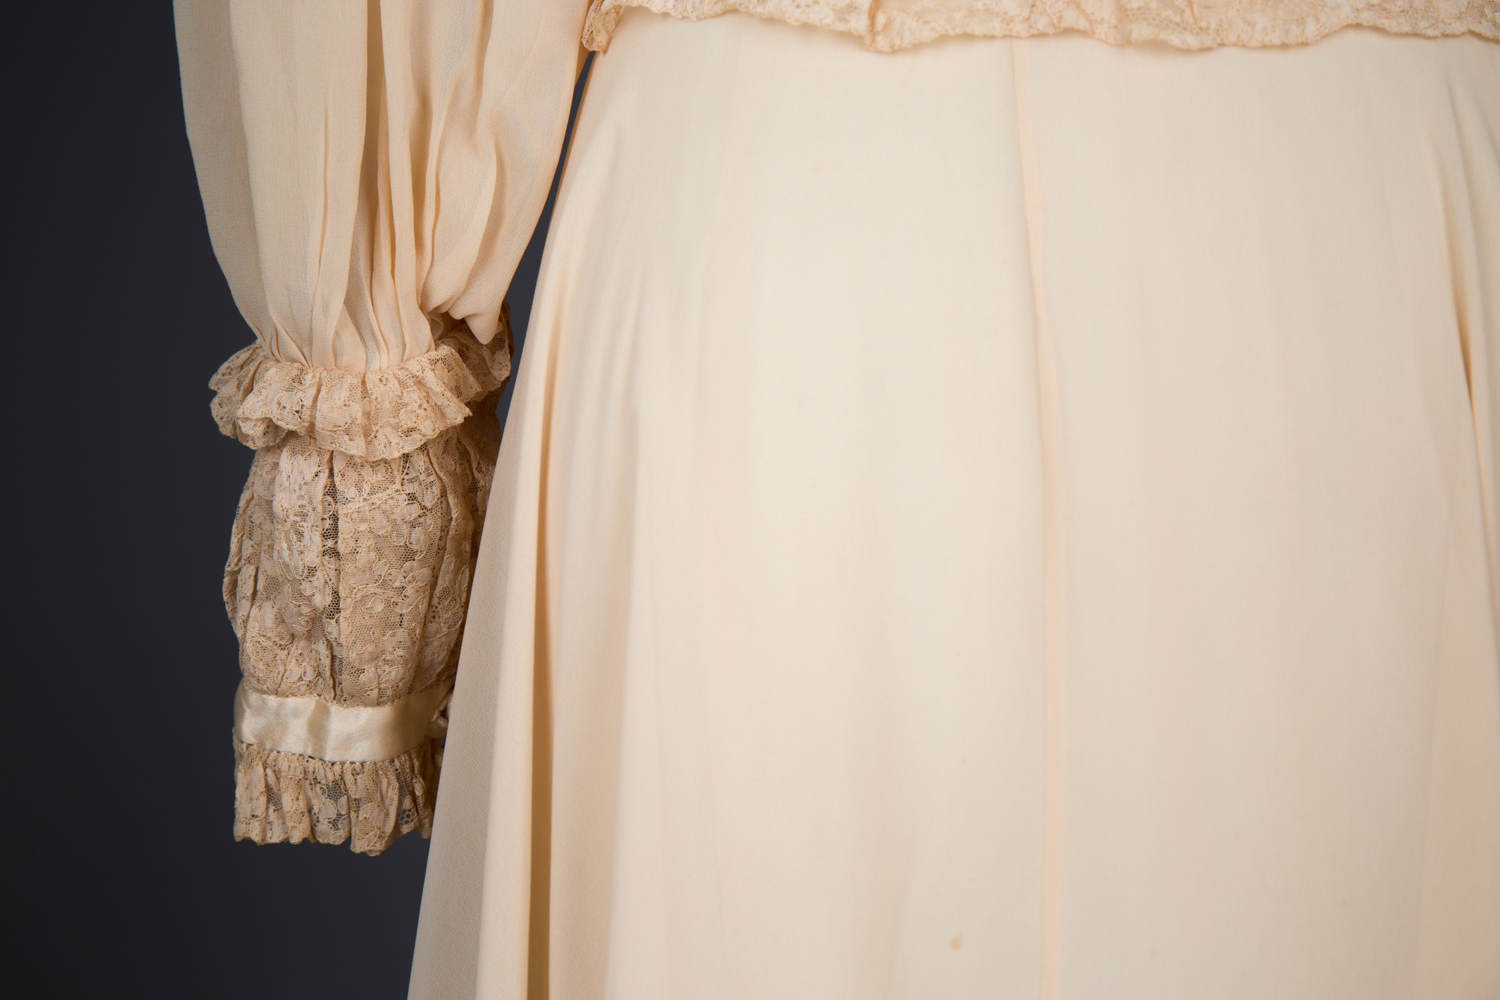 Bias Cut Silk Crepe & Corded Lace Peignoir by Bullock’s Wilshire , c. 1940s, USA. The Underpinnings Museum. Photography by Tigz Rice.